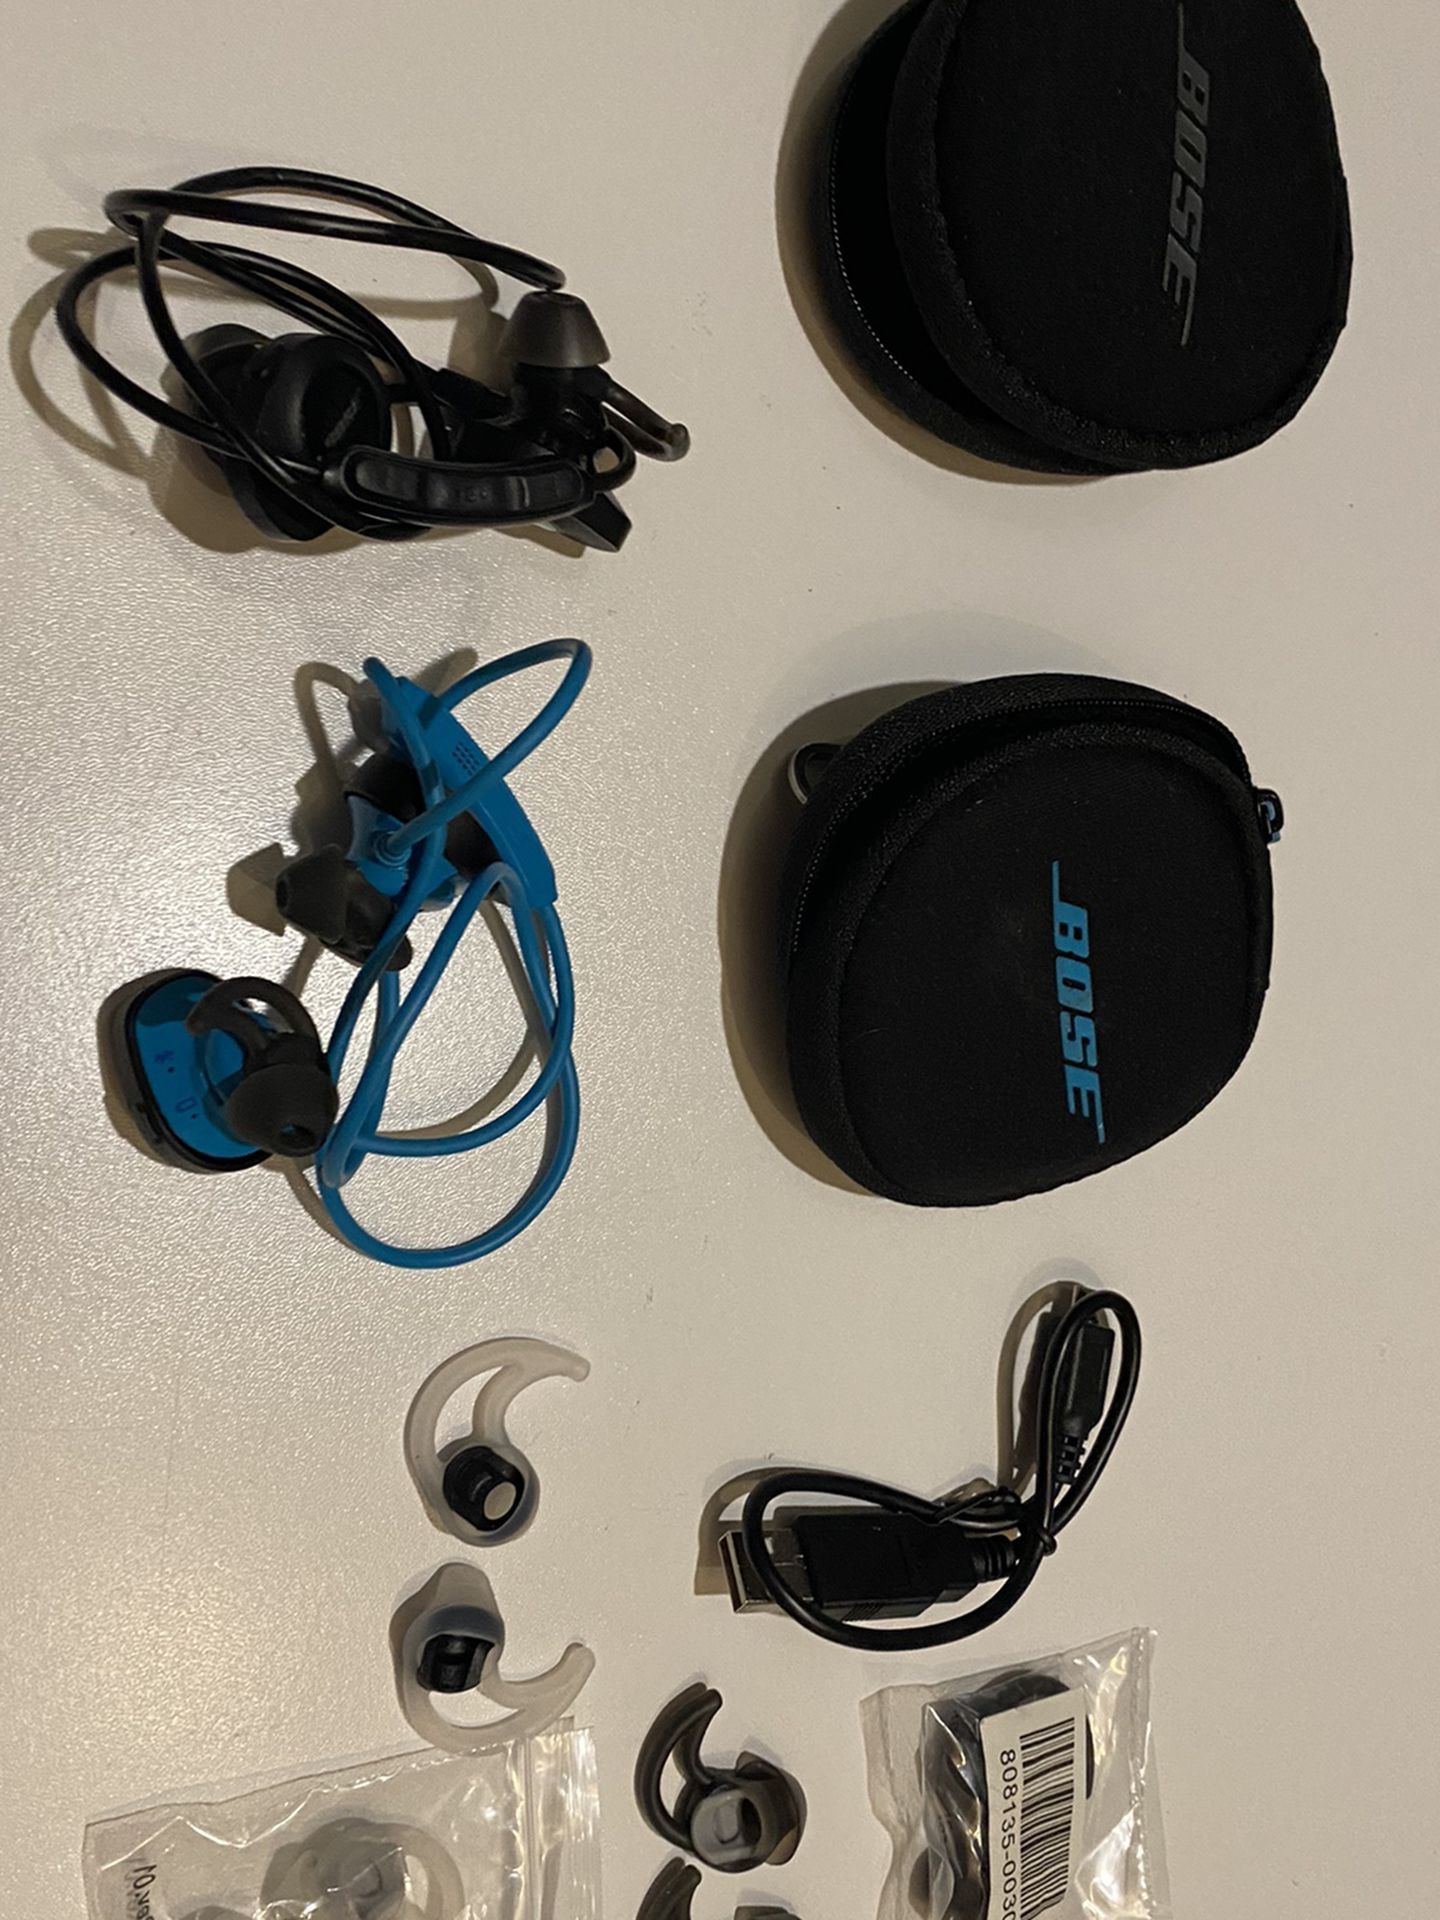 2 Pairs Of Bose Soundsport Bluetooth Earbuds